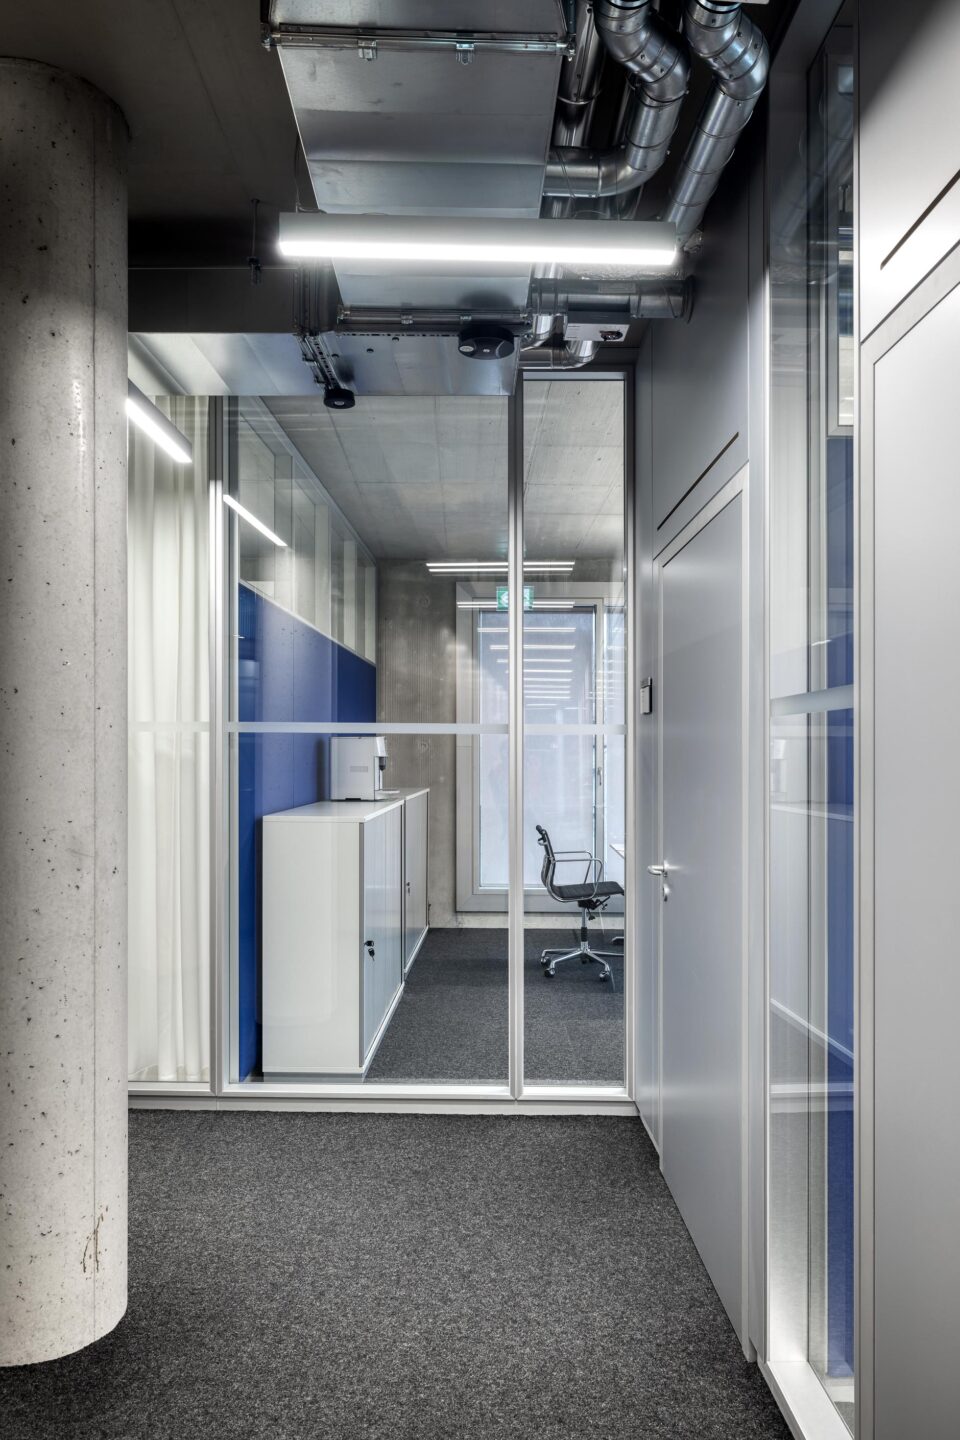 The wall-integrated overflow elements allow air exchange between the office and the corridor and at the same time provide sound insulation.